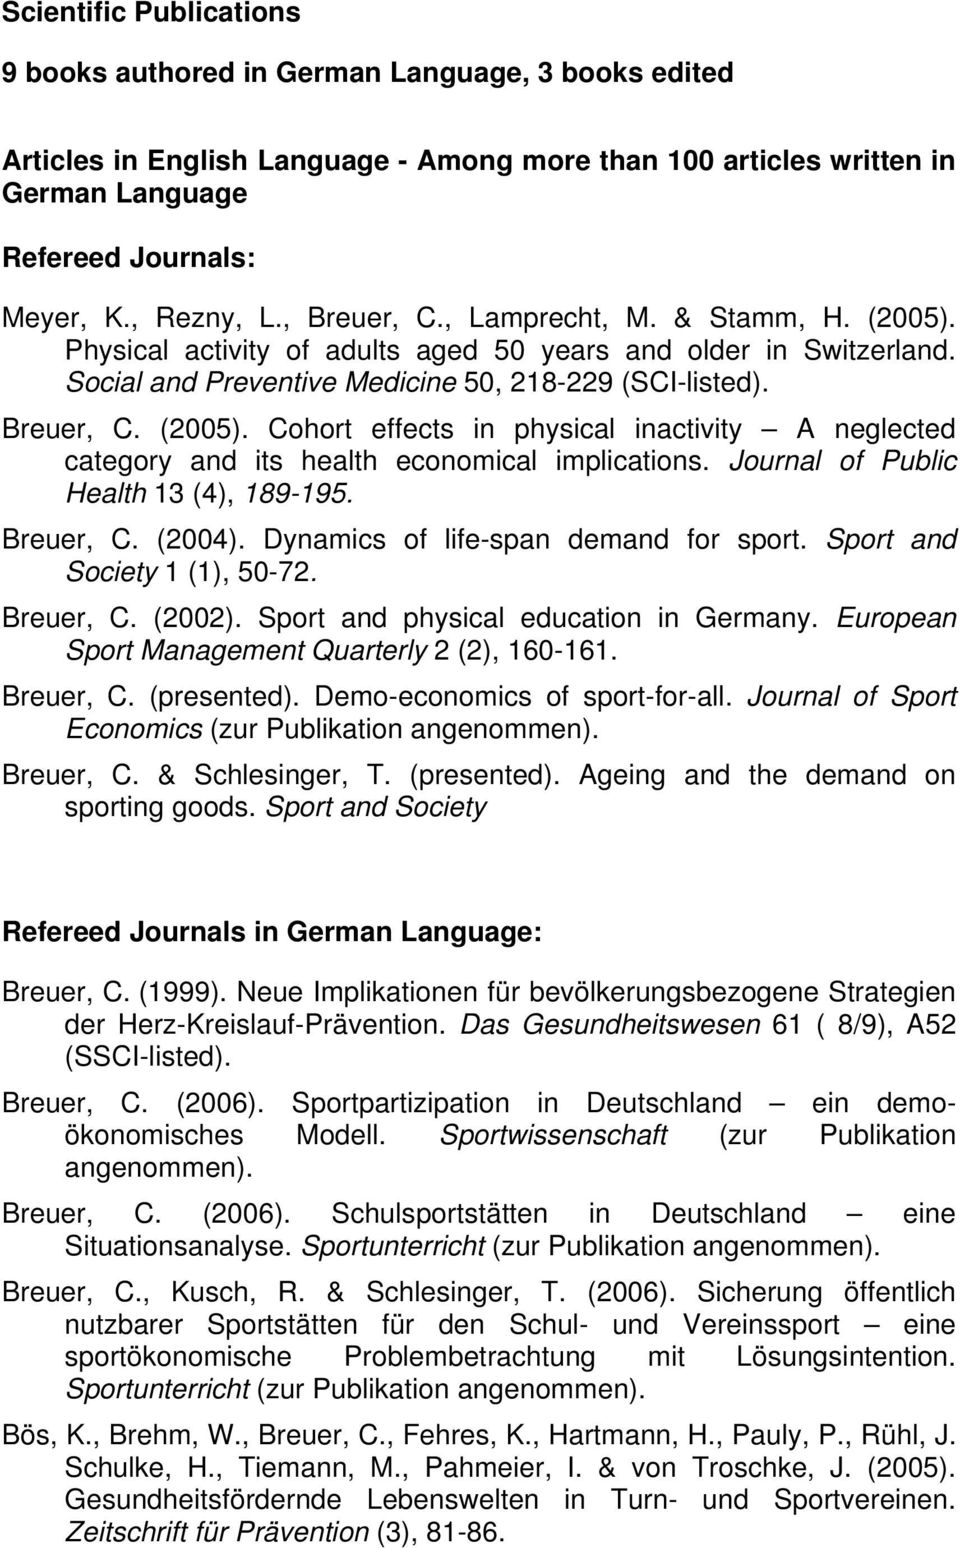 Journal of Public Health 13 (4), 189-195. Breuer, C. (2004). Dynamics of life-span demand for sport. Sport and Society 1 (1), 50-72. Breuer, C. (2002). Sport and physical education in Germany.